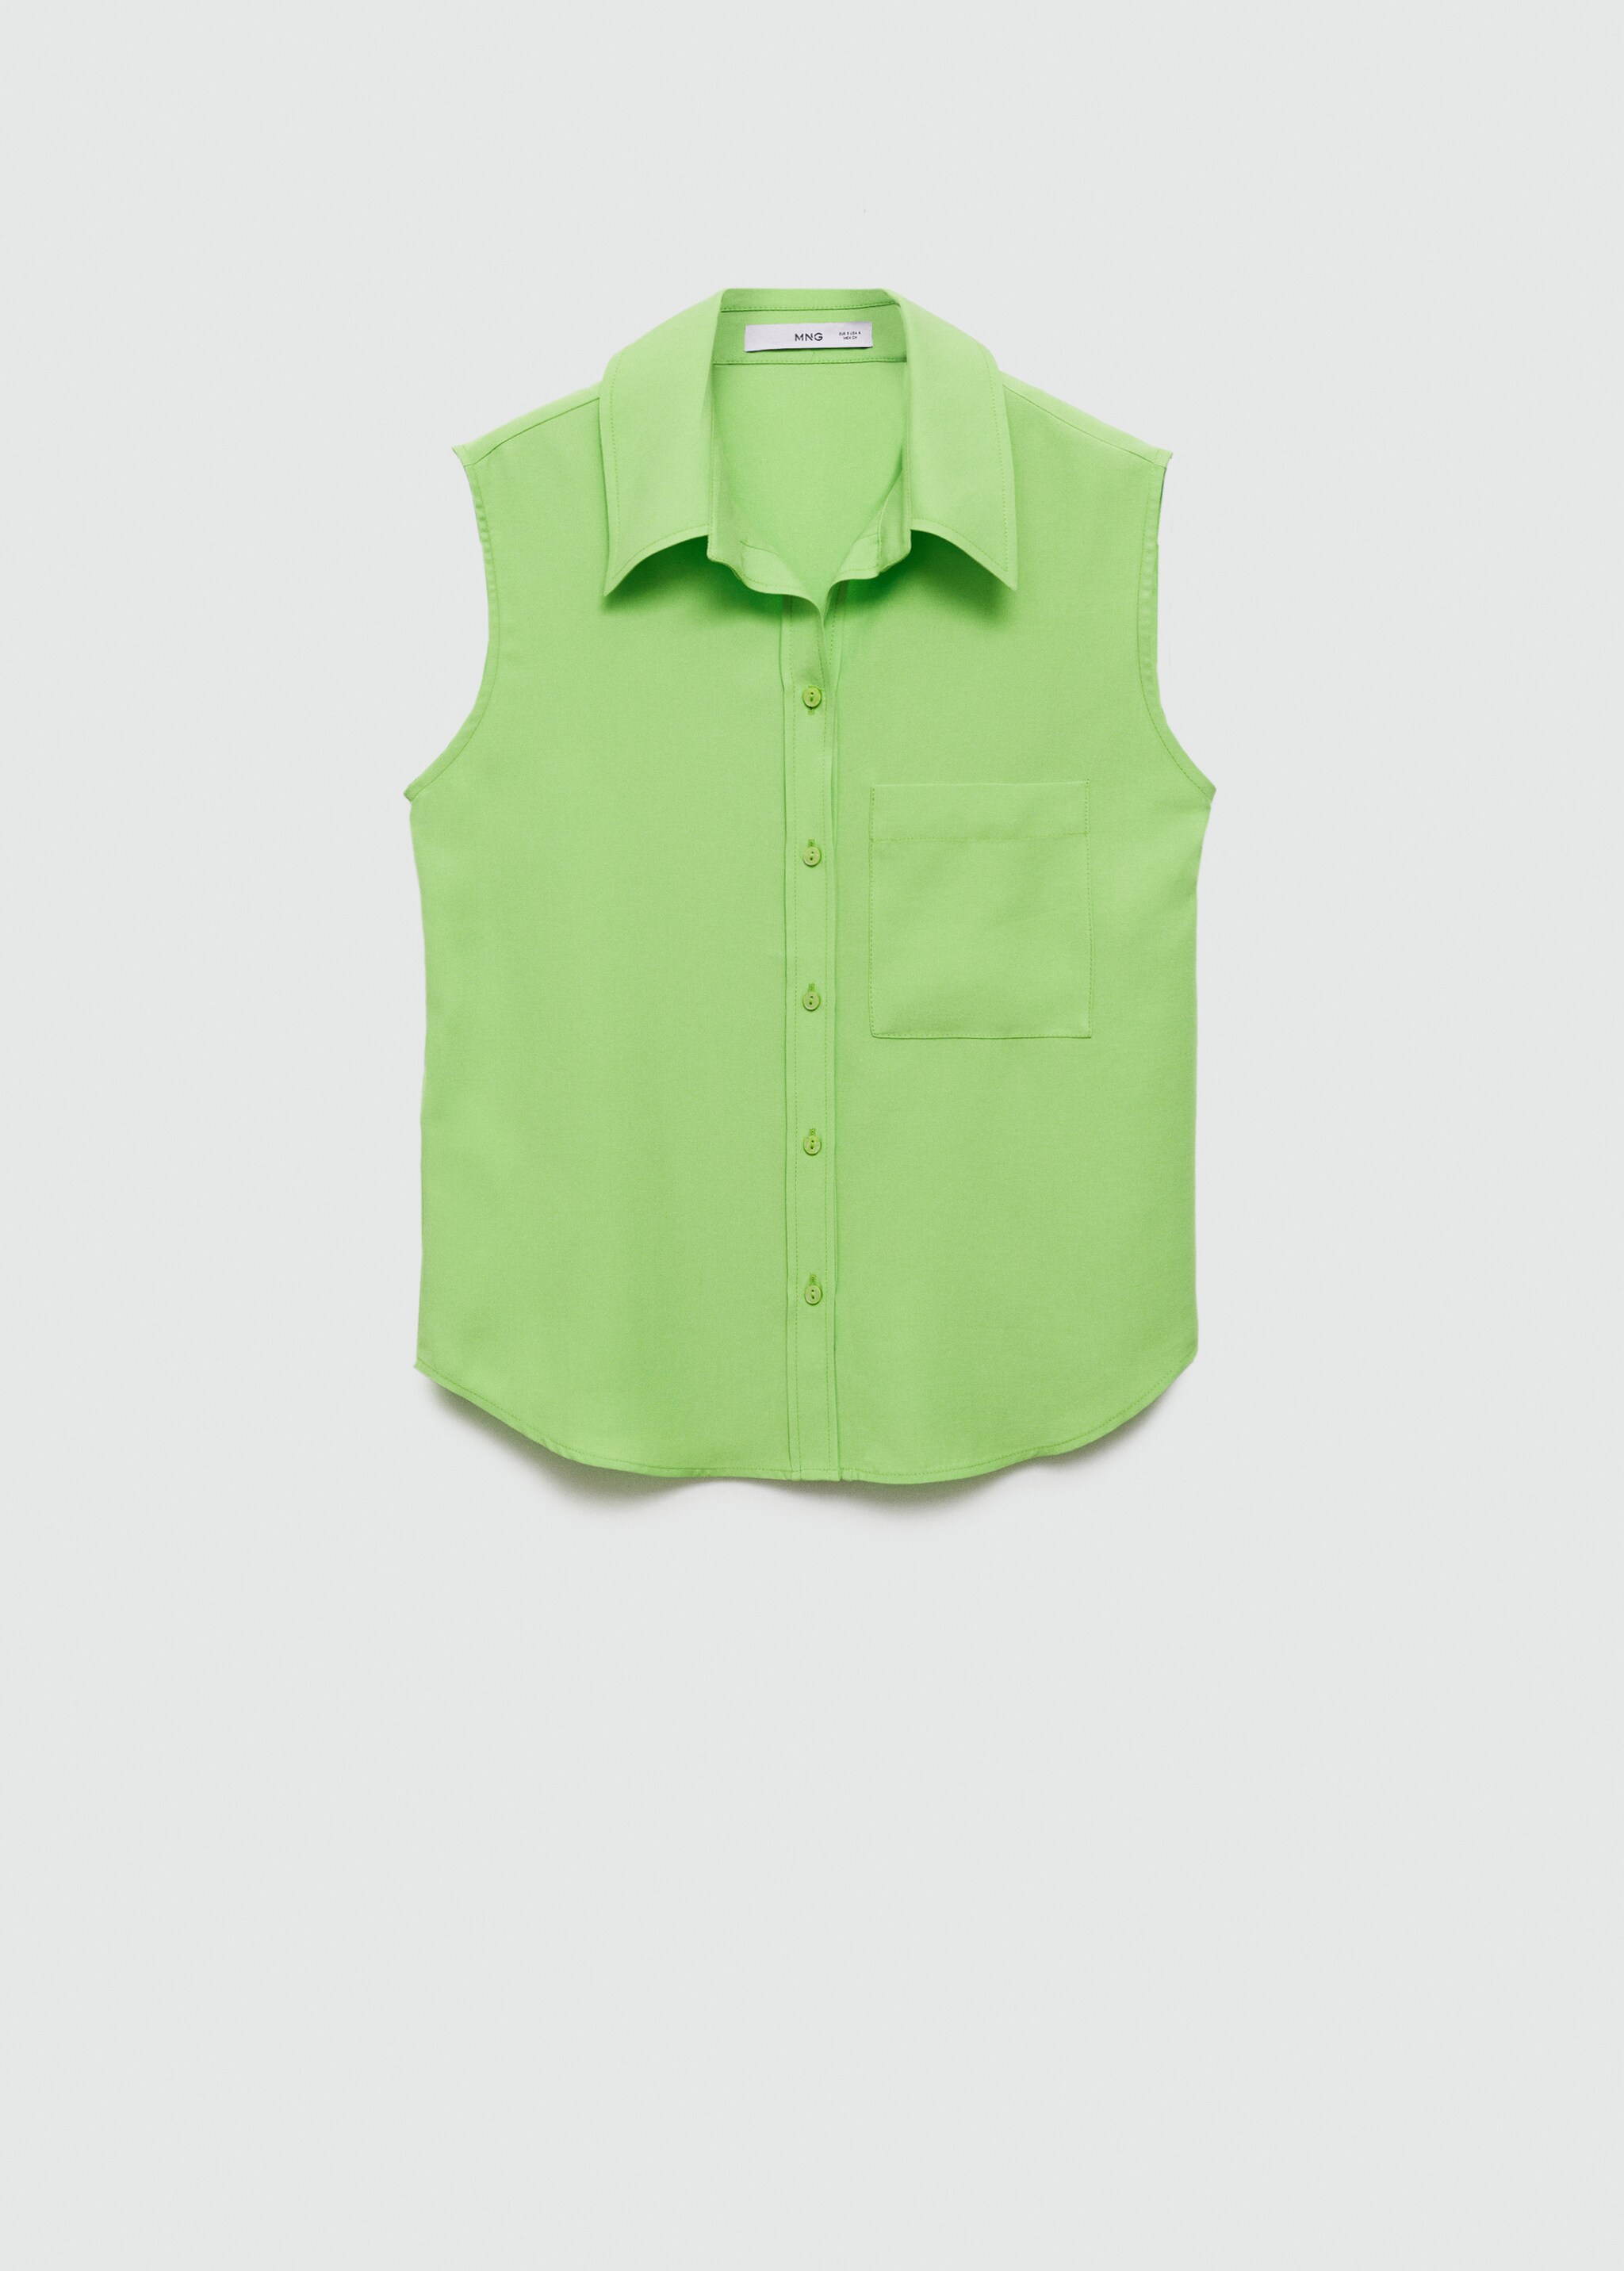  Lyocell sleeveless shirt - Article without model